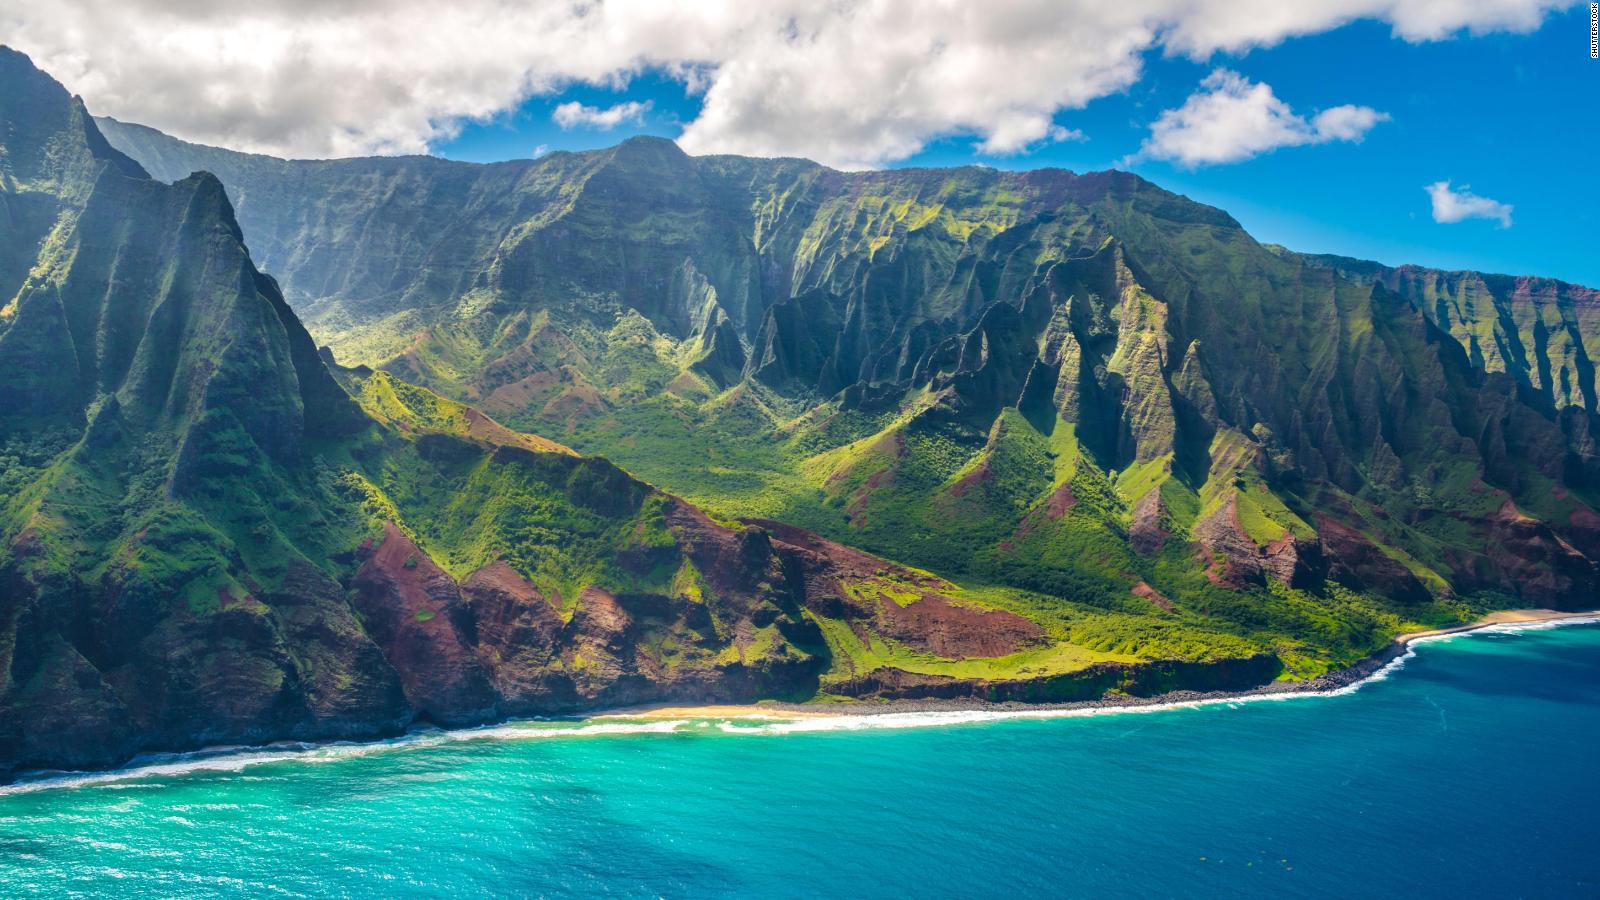 How Long Is The Flight From LAX To Hawaii? - The Family Vacation Guide